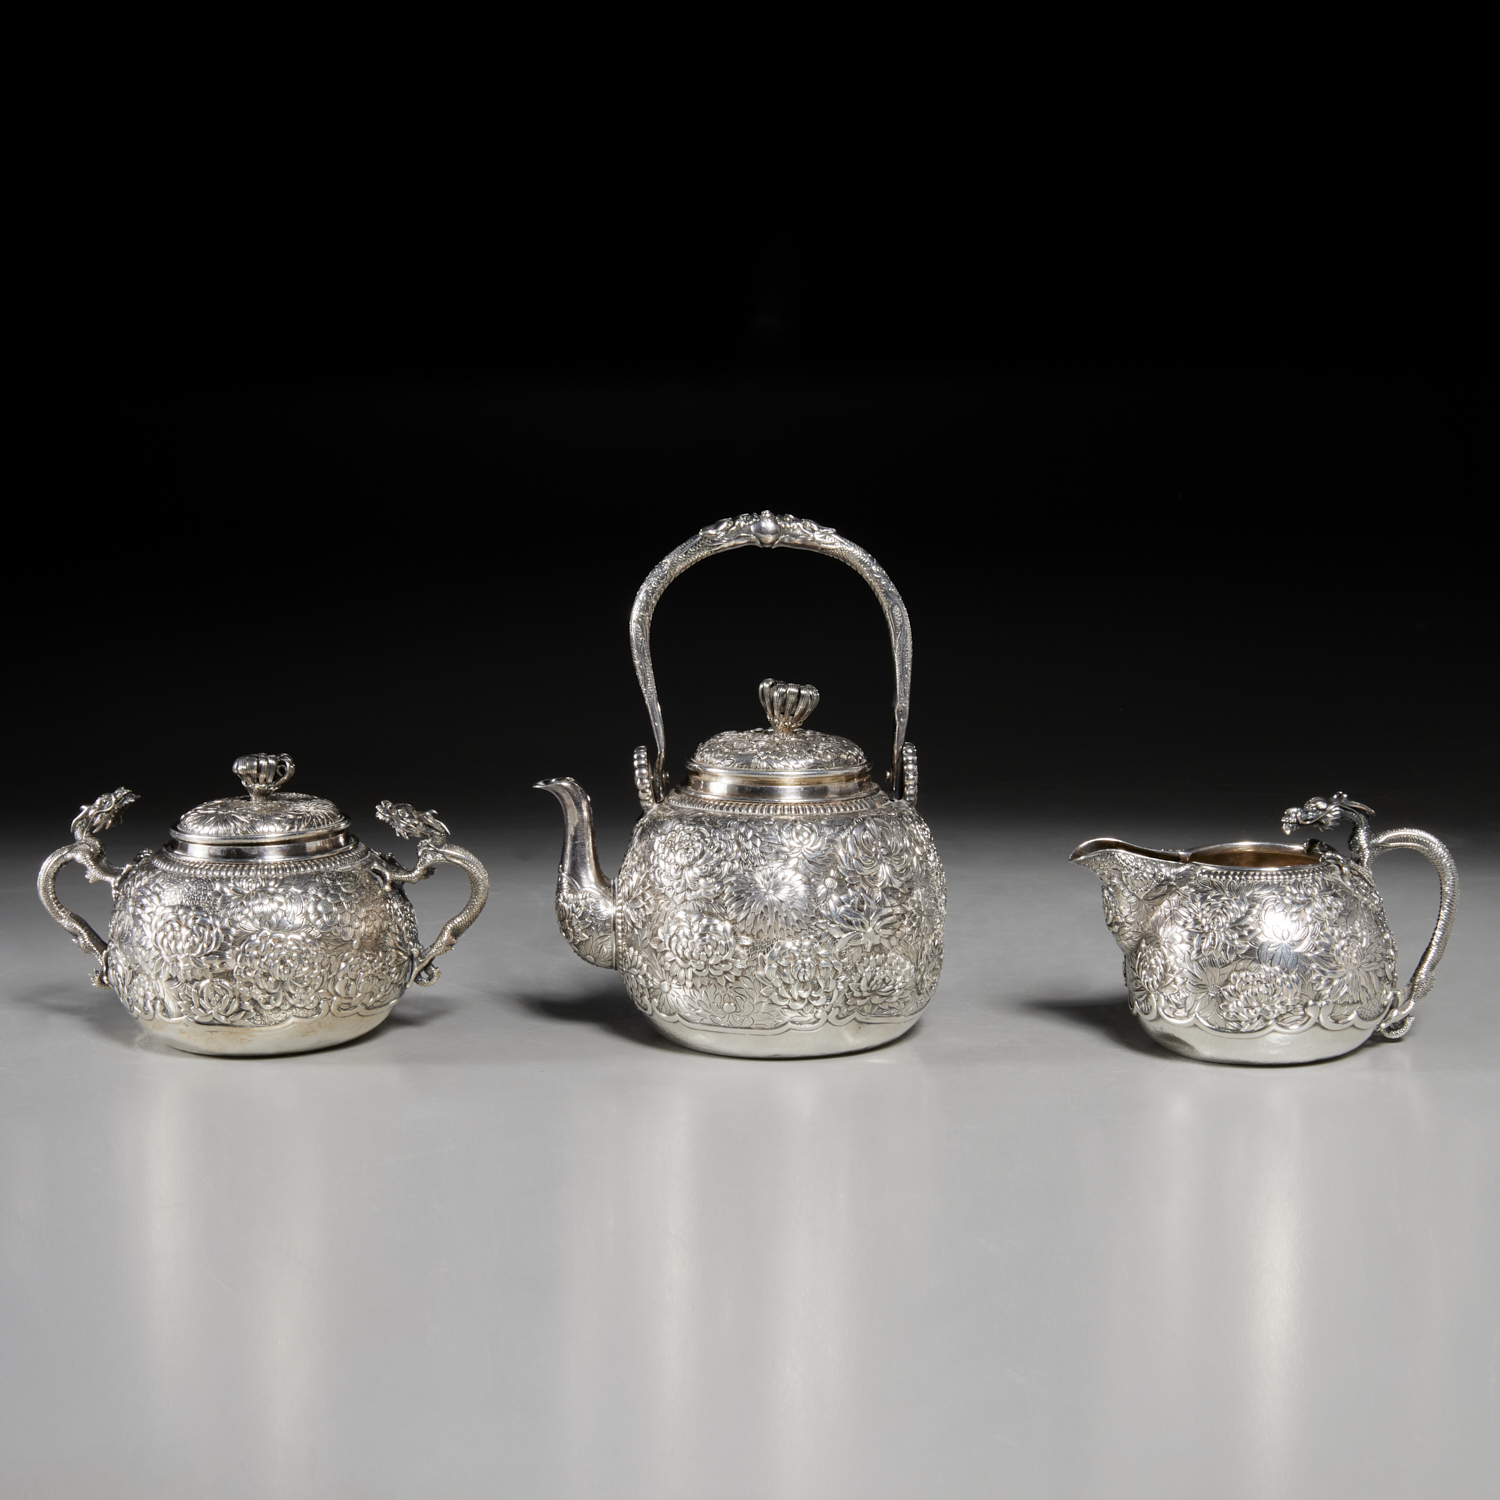 JAPANESE EXPORT 3-PIECE SILVER REPOUSSE